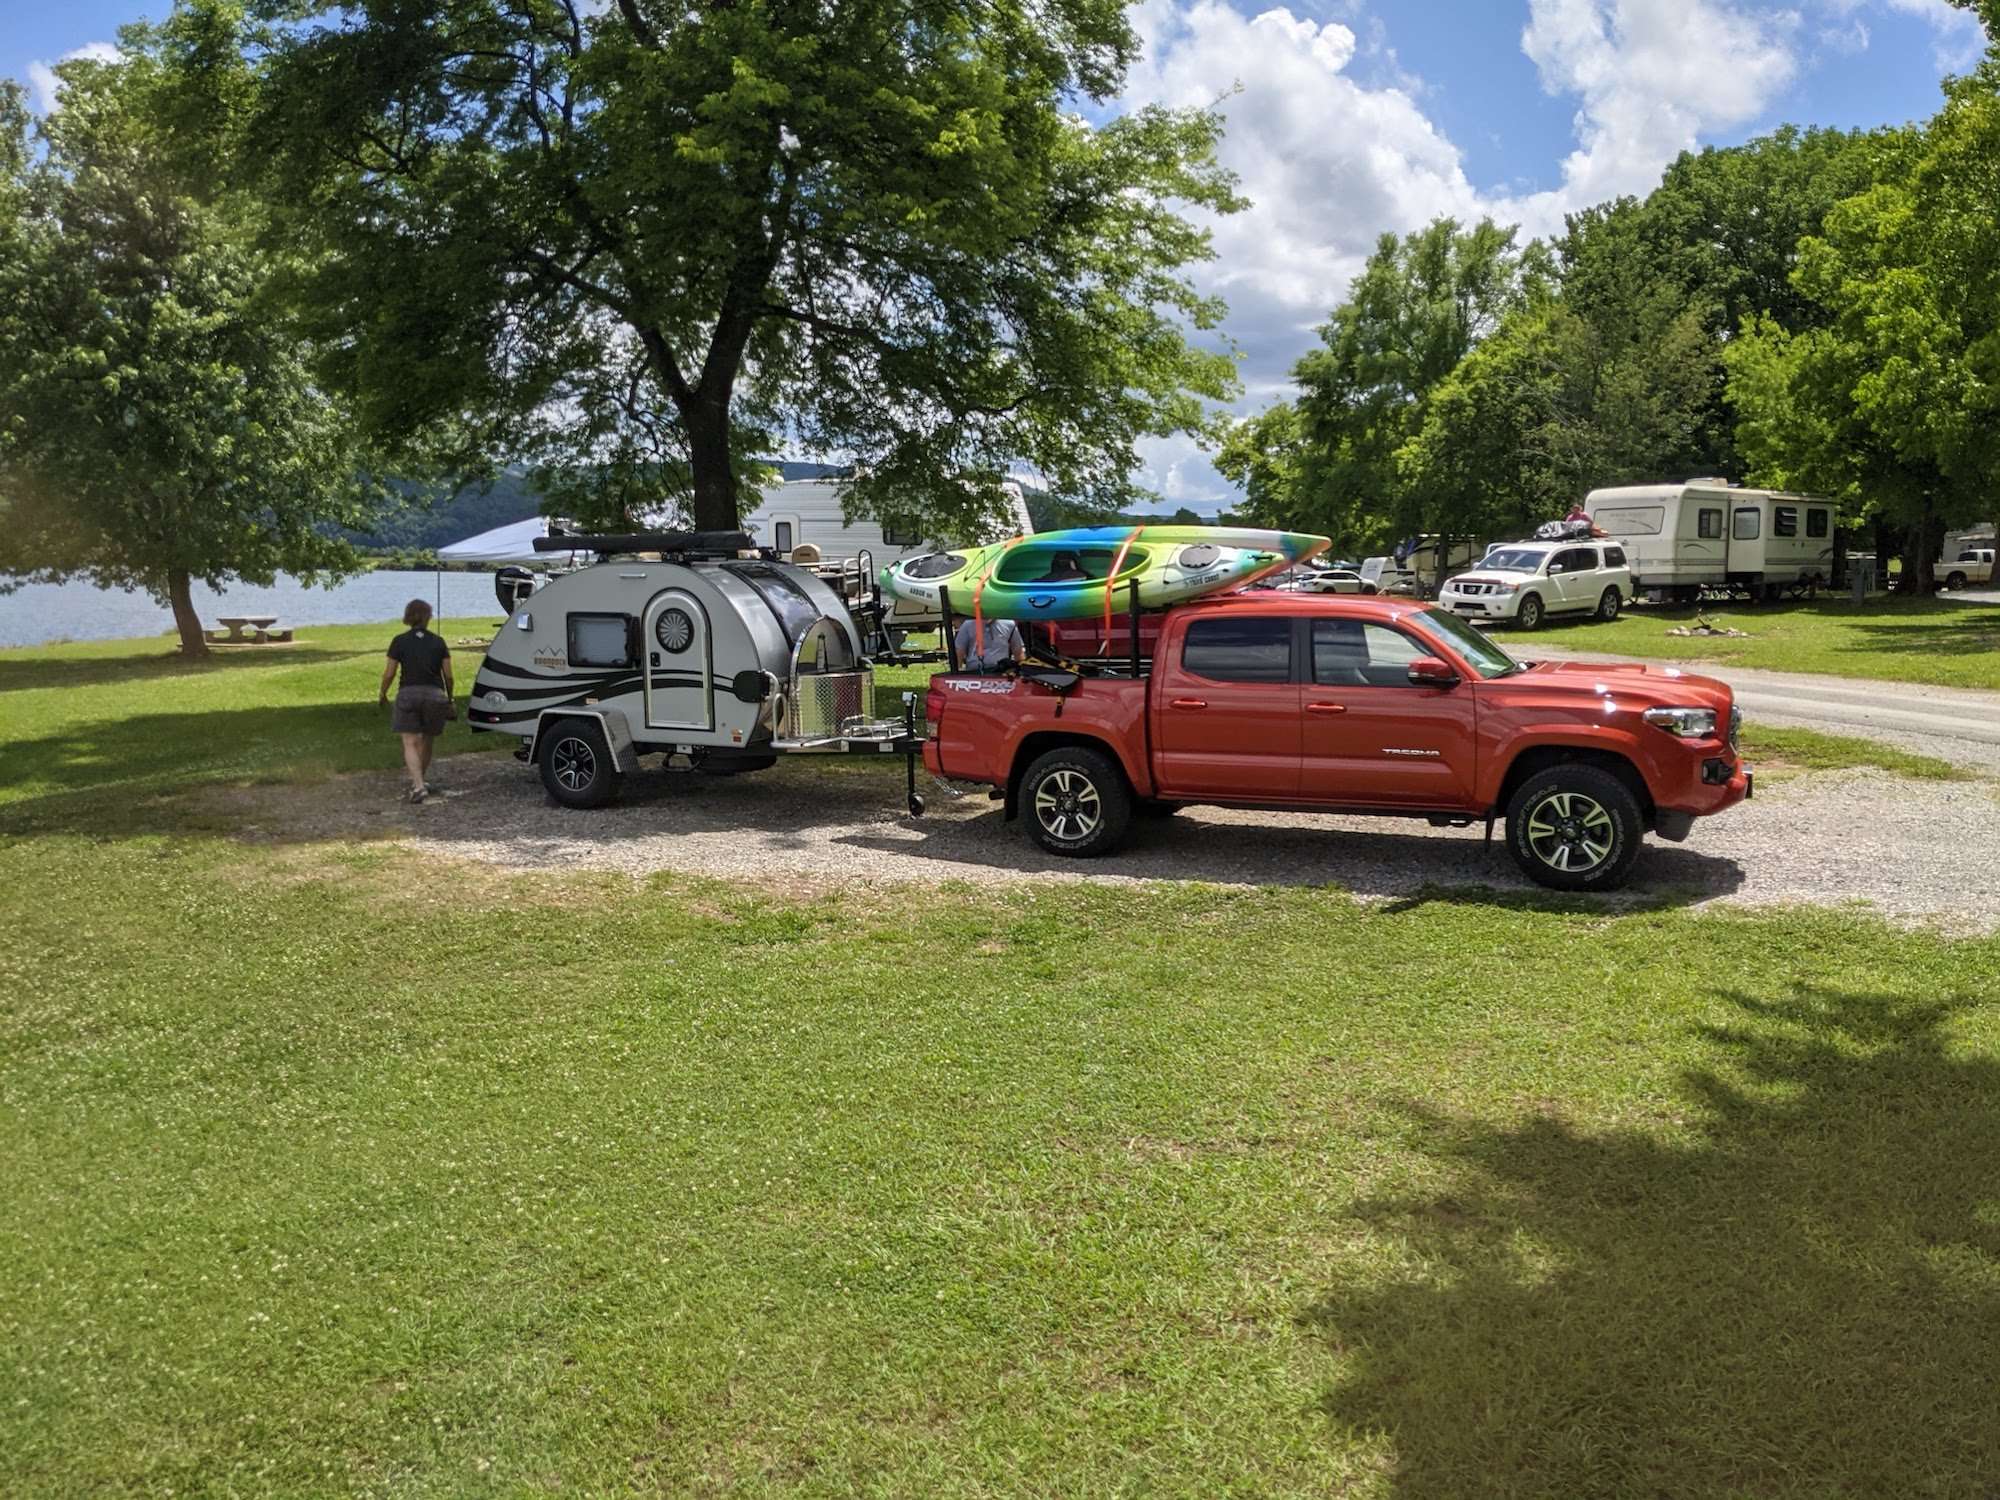 Small teardrop campers can be towed by a small truck or SUV.